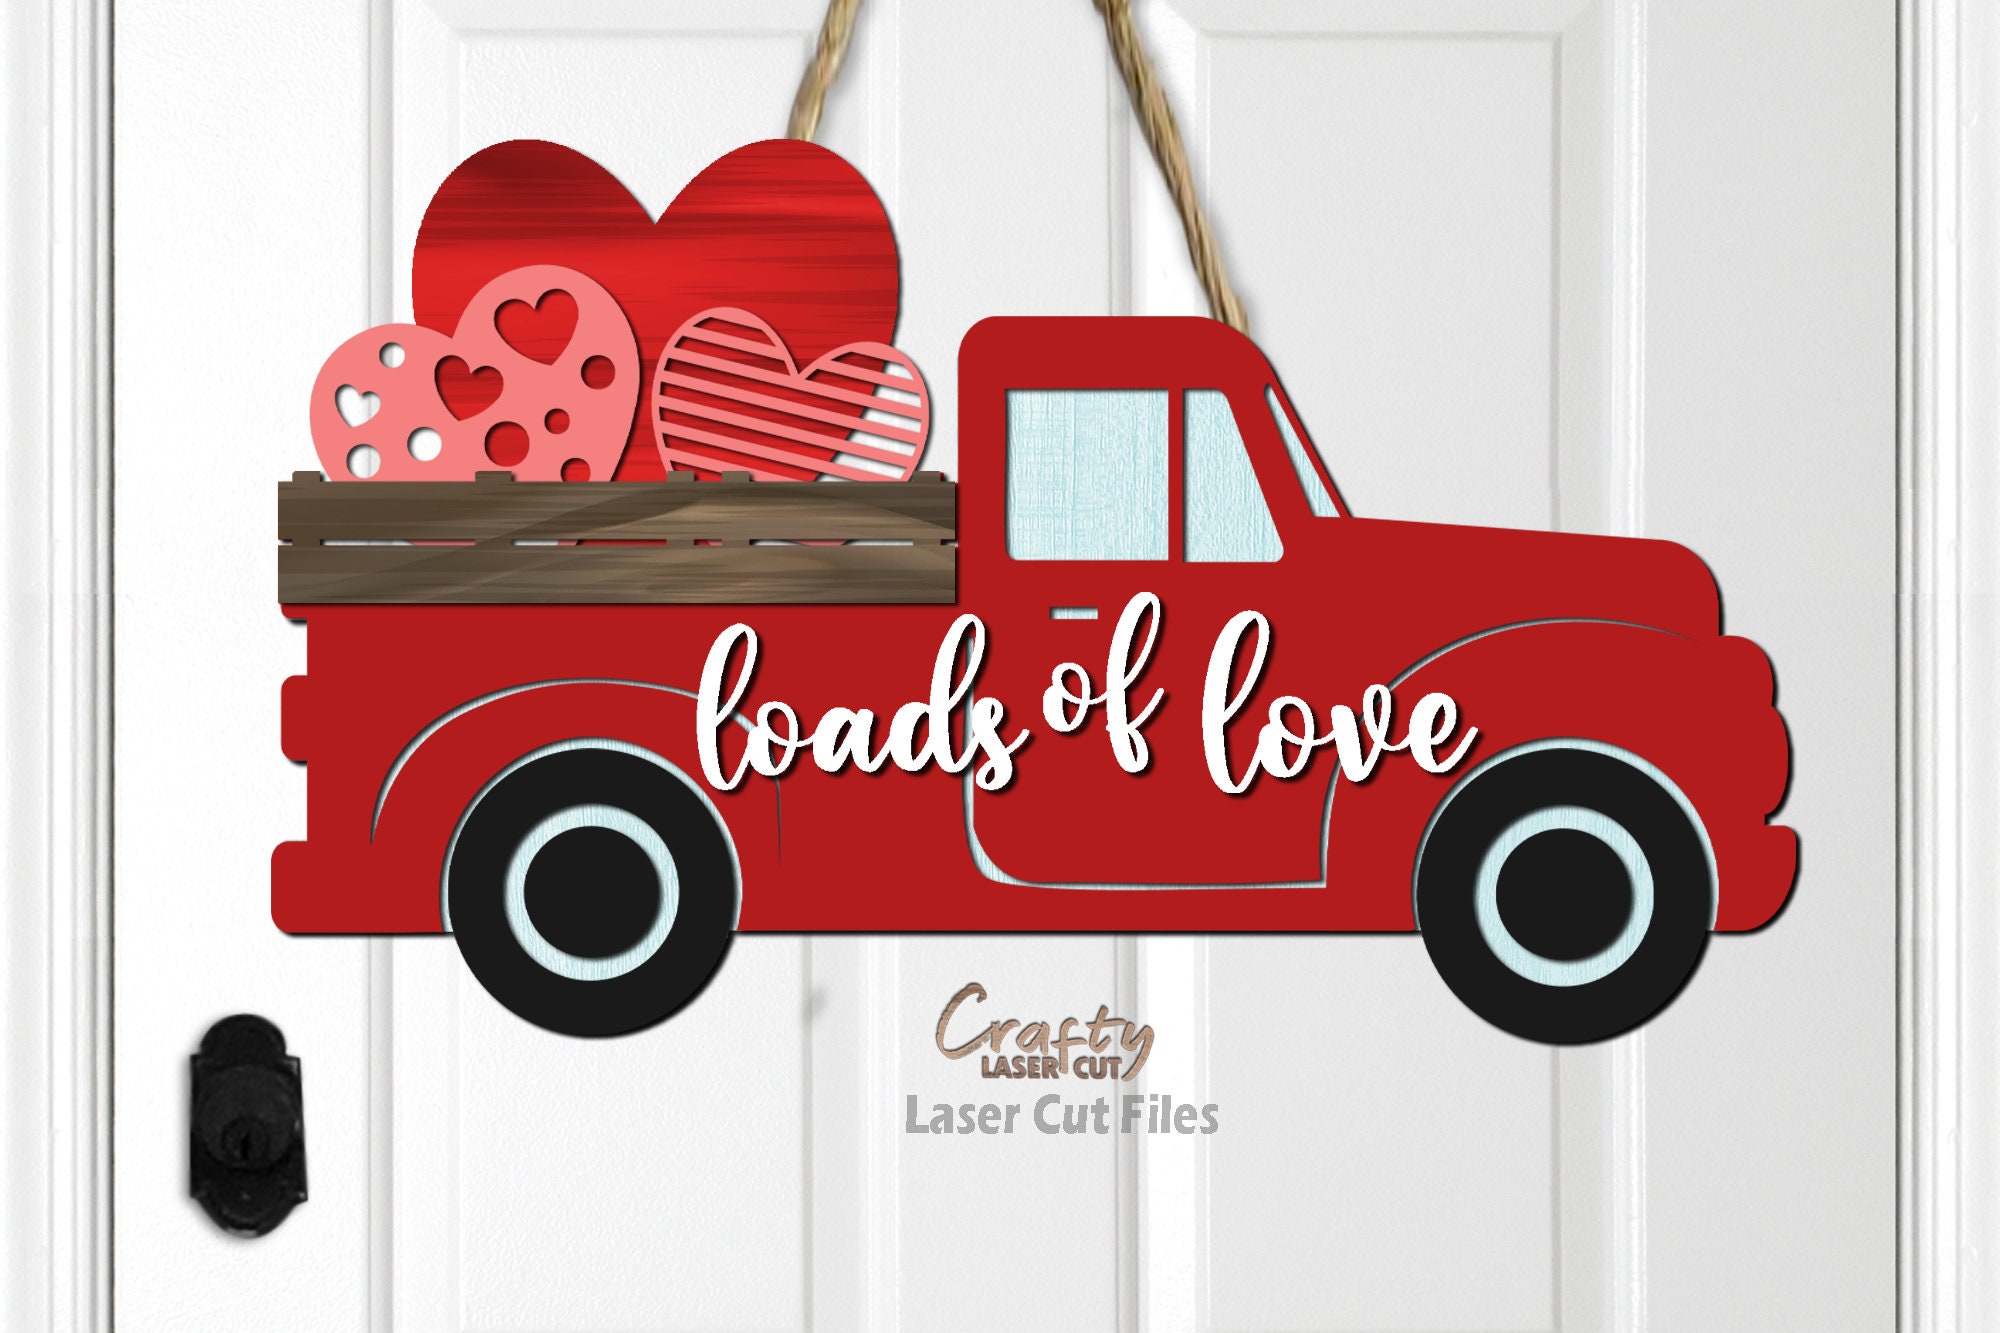 3 SET VALENTINE'S Day Diamond Painting Hanging Sign 5D Truck Heart Wreath  $33.95 - PicClick